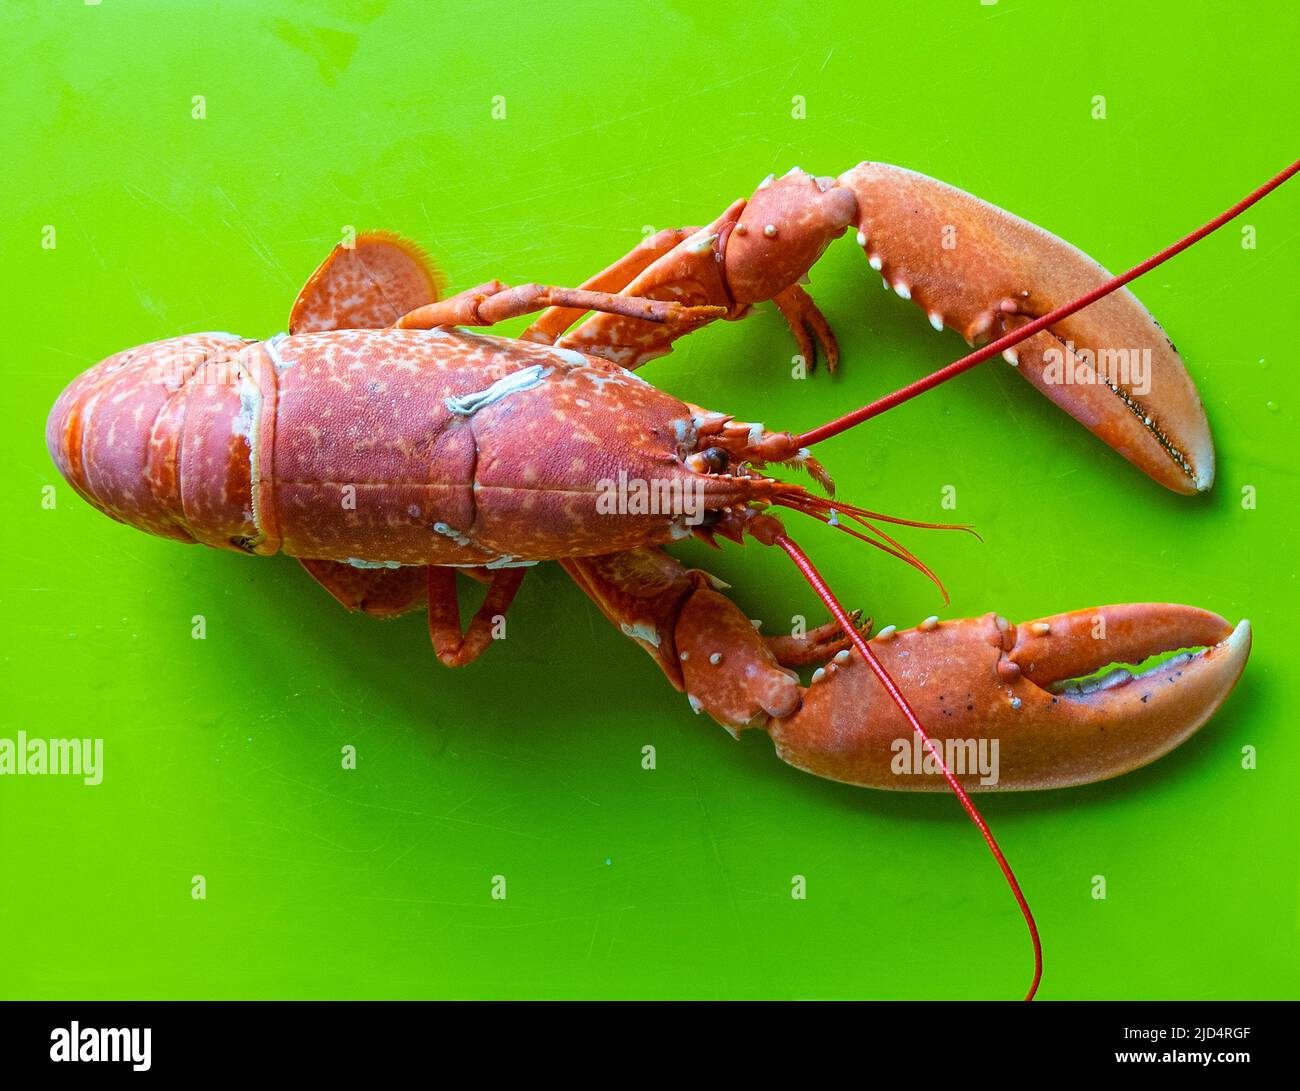 Lobster on green background Stock Photo